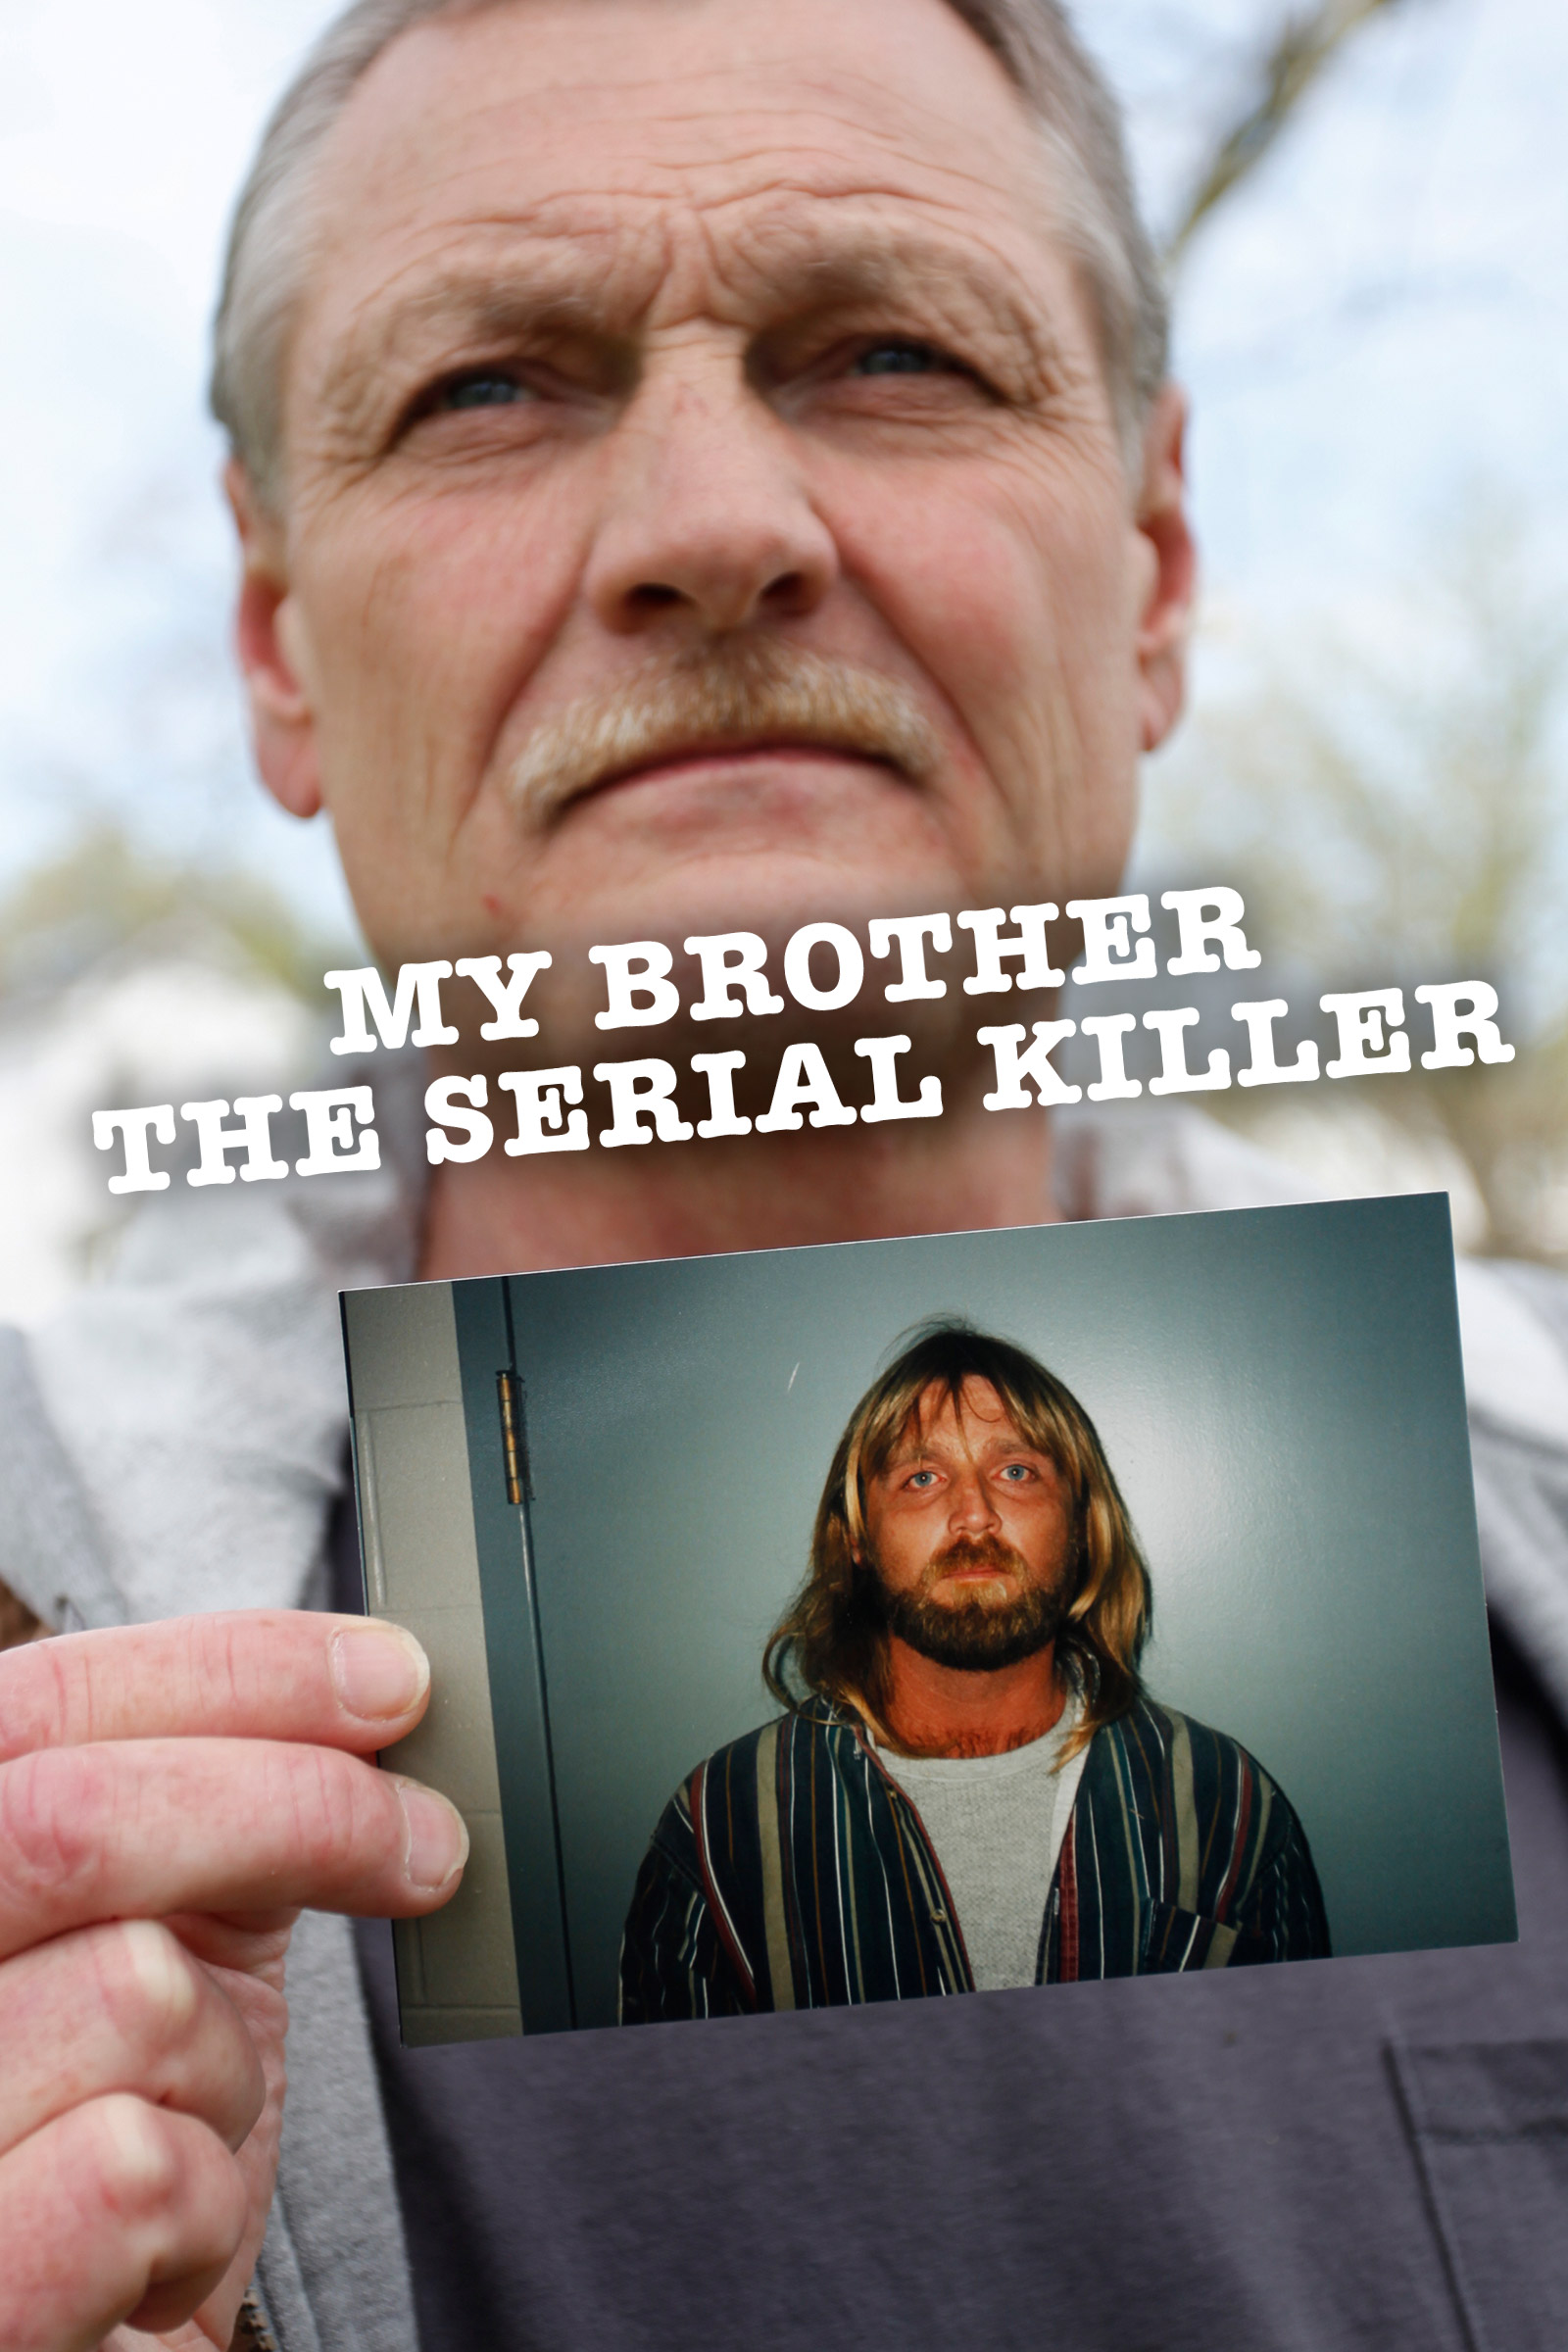 Where to stream My Brother the Serial Killer